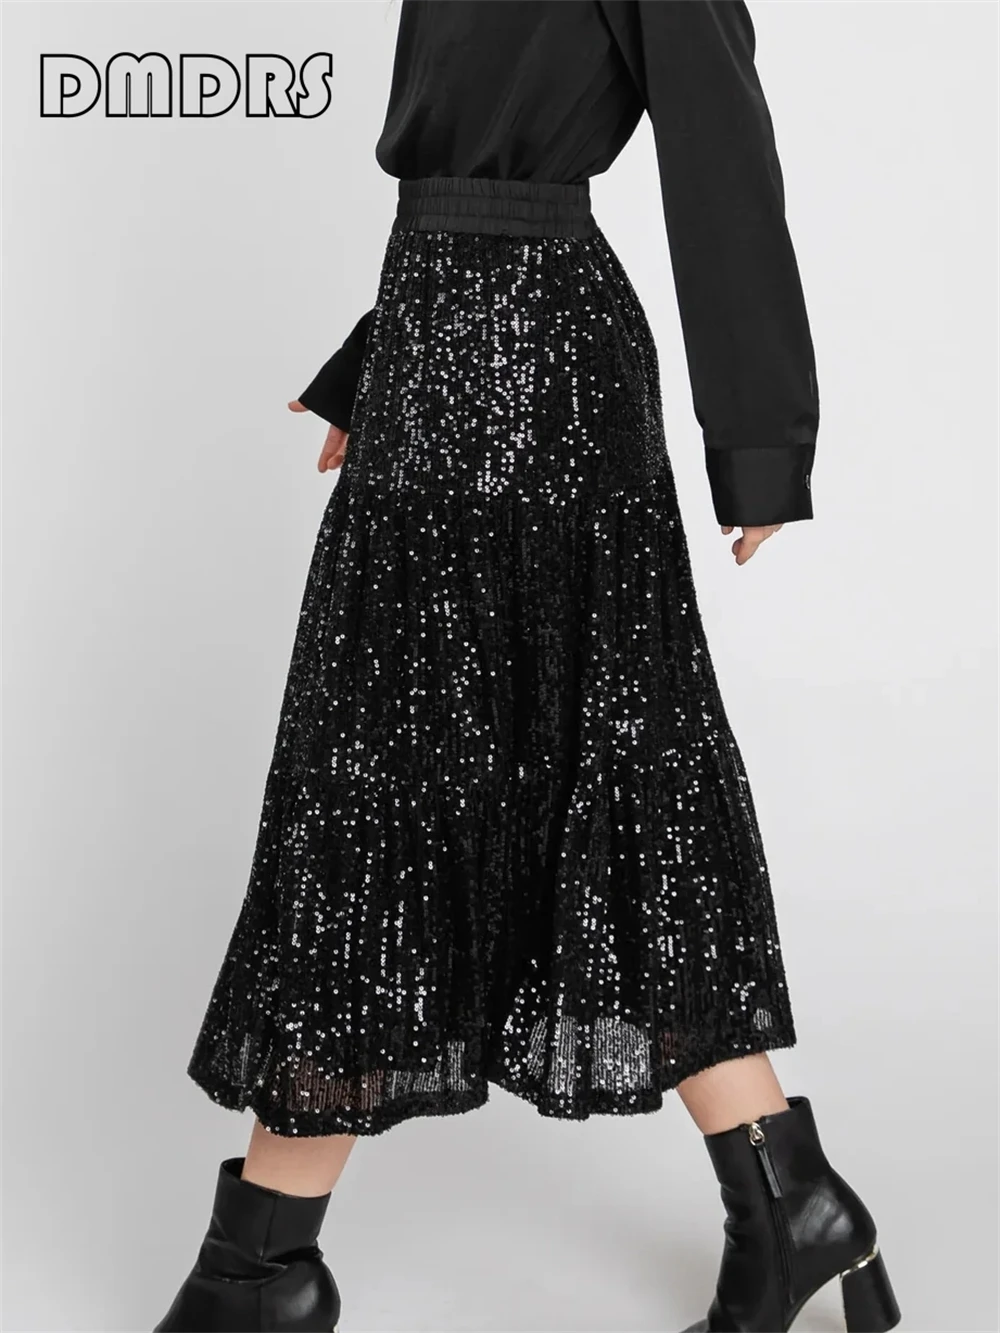 Sequin Tiered Midi Skirt For Women Black Lined Stretch Waistband Dress wheels outdoor plant shelf black adjustable universal metal plant shelf flowers tiered scaffale per piante balcony furniture